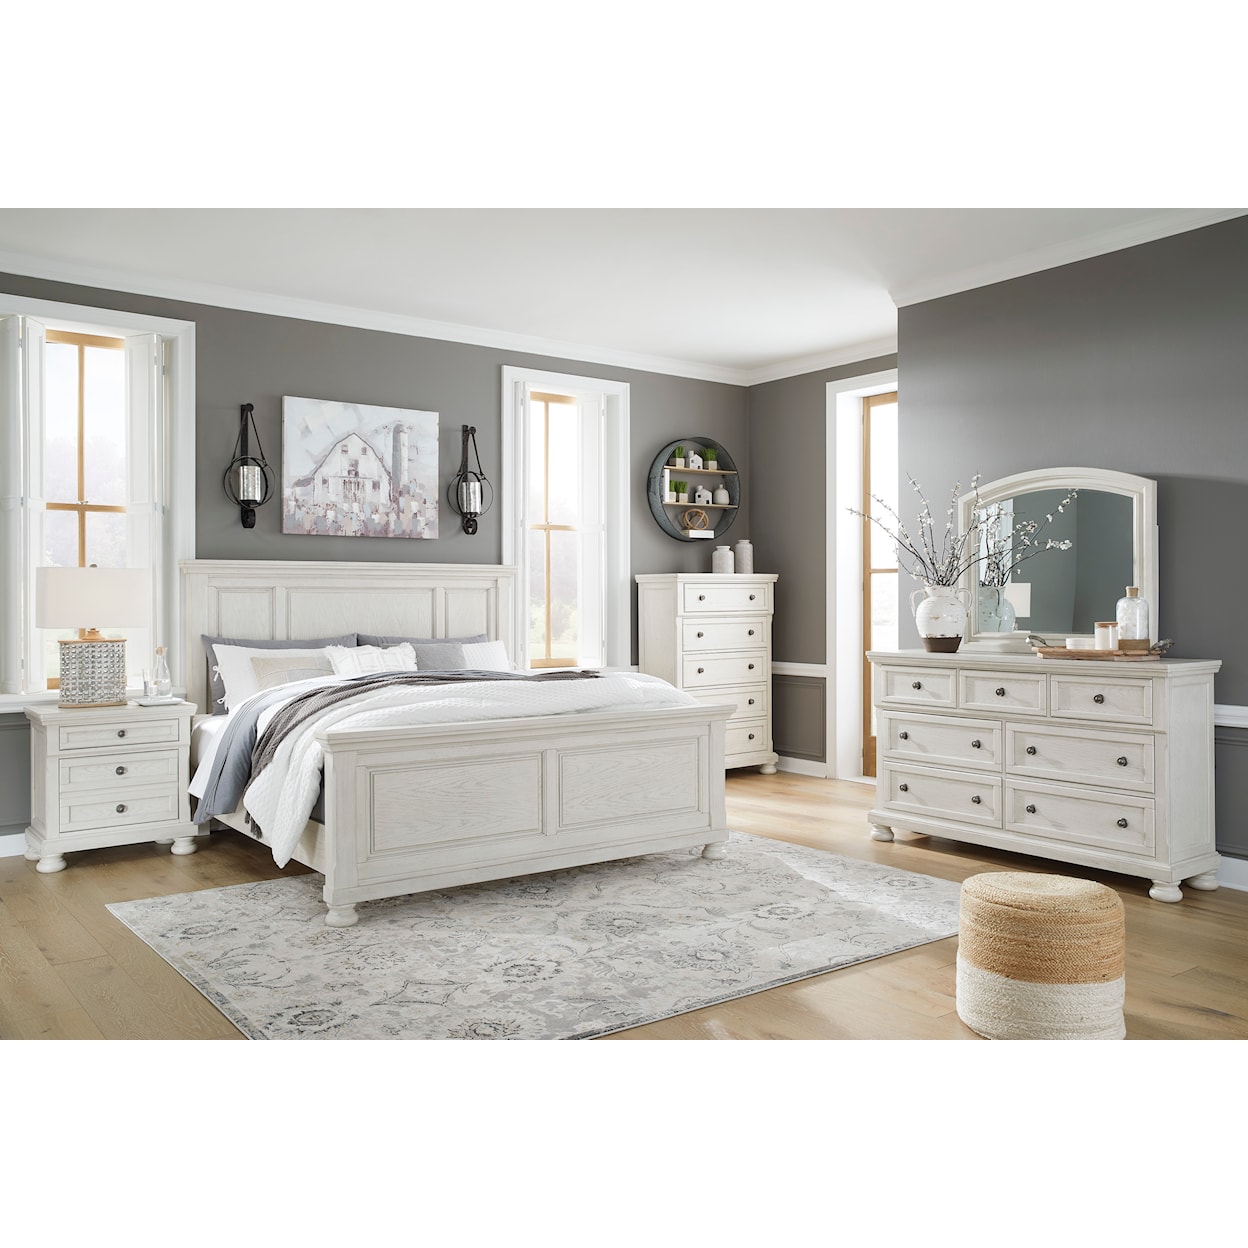 Ashley Signature Design Robbinsdale Queen Bedroom Group